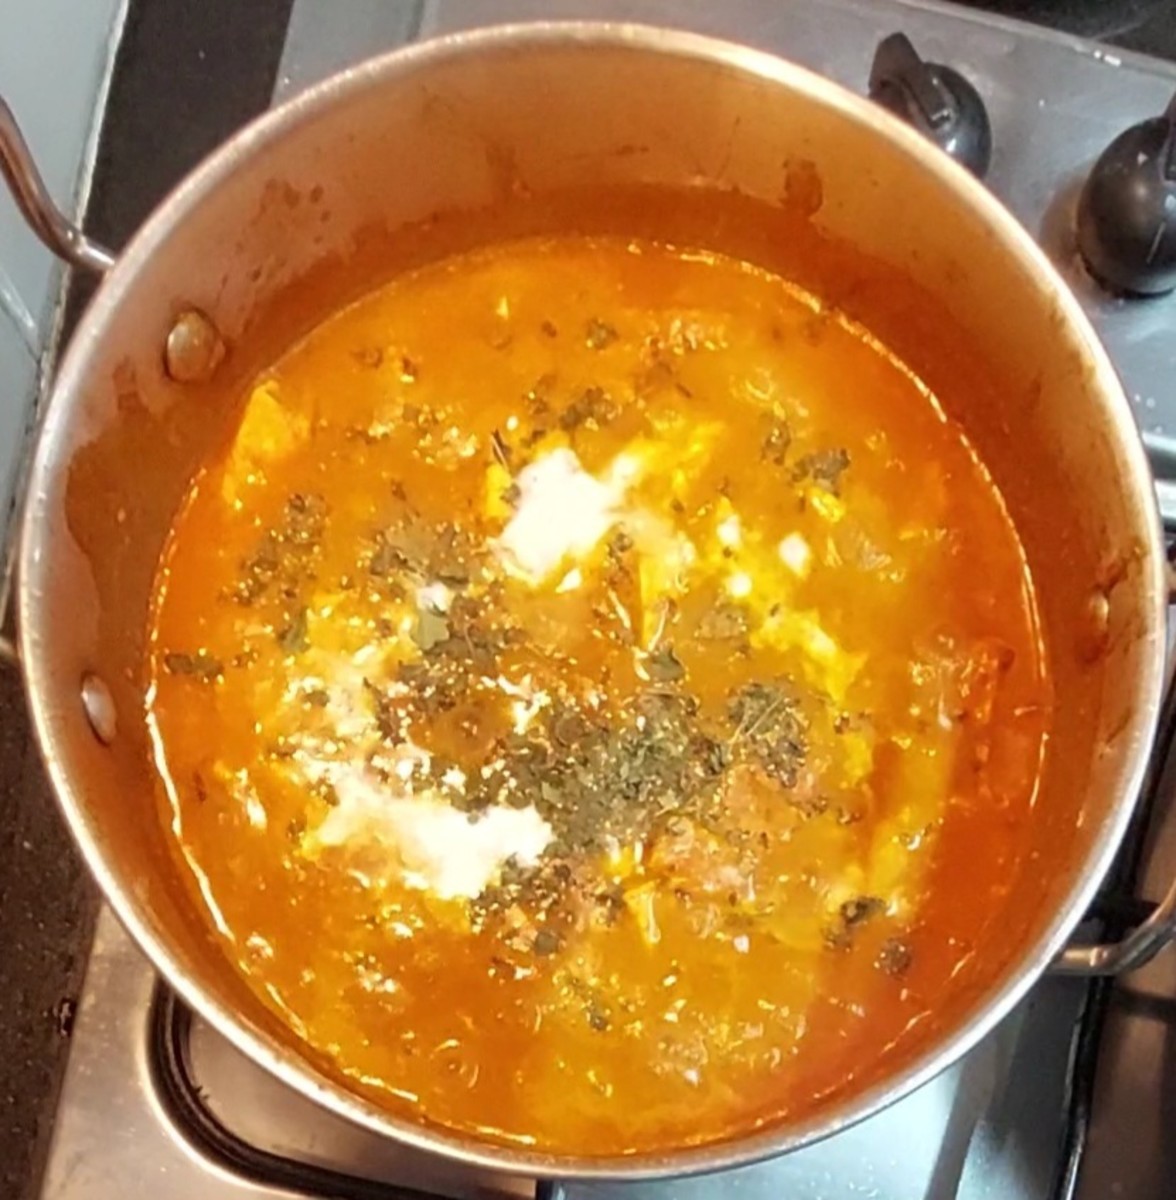 Add 1 teaspoon crushed kasuri methi (dry fenugreek leaves). Add salt if required. Add 2 tablespoons fresh cream, mix and combine well. Switch off the flame.